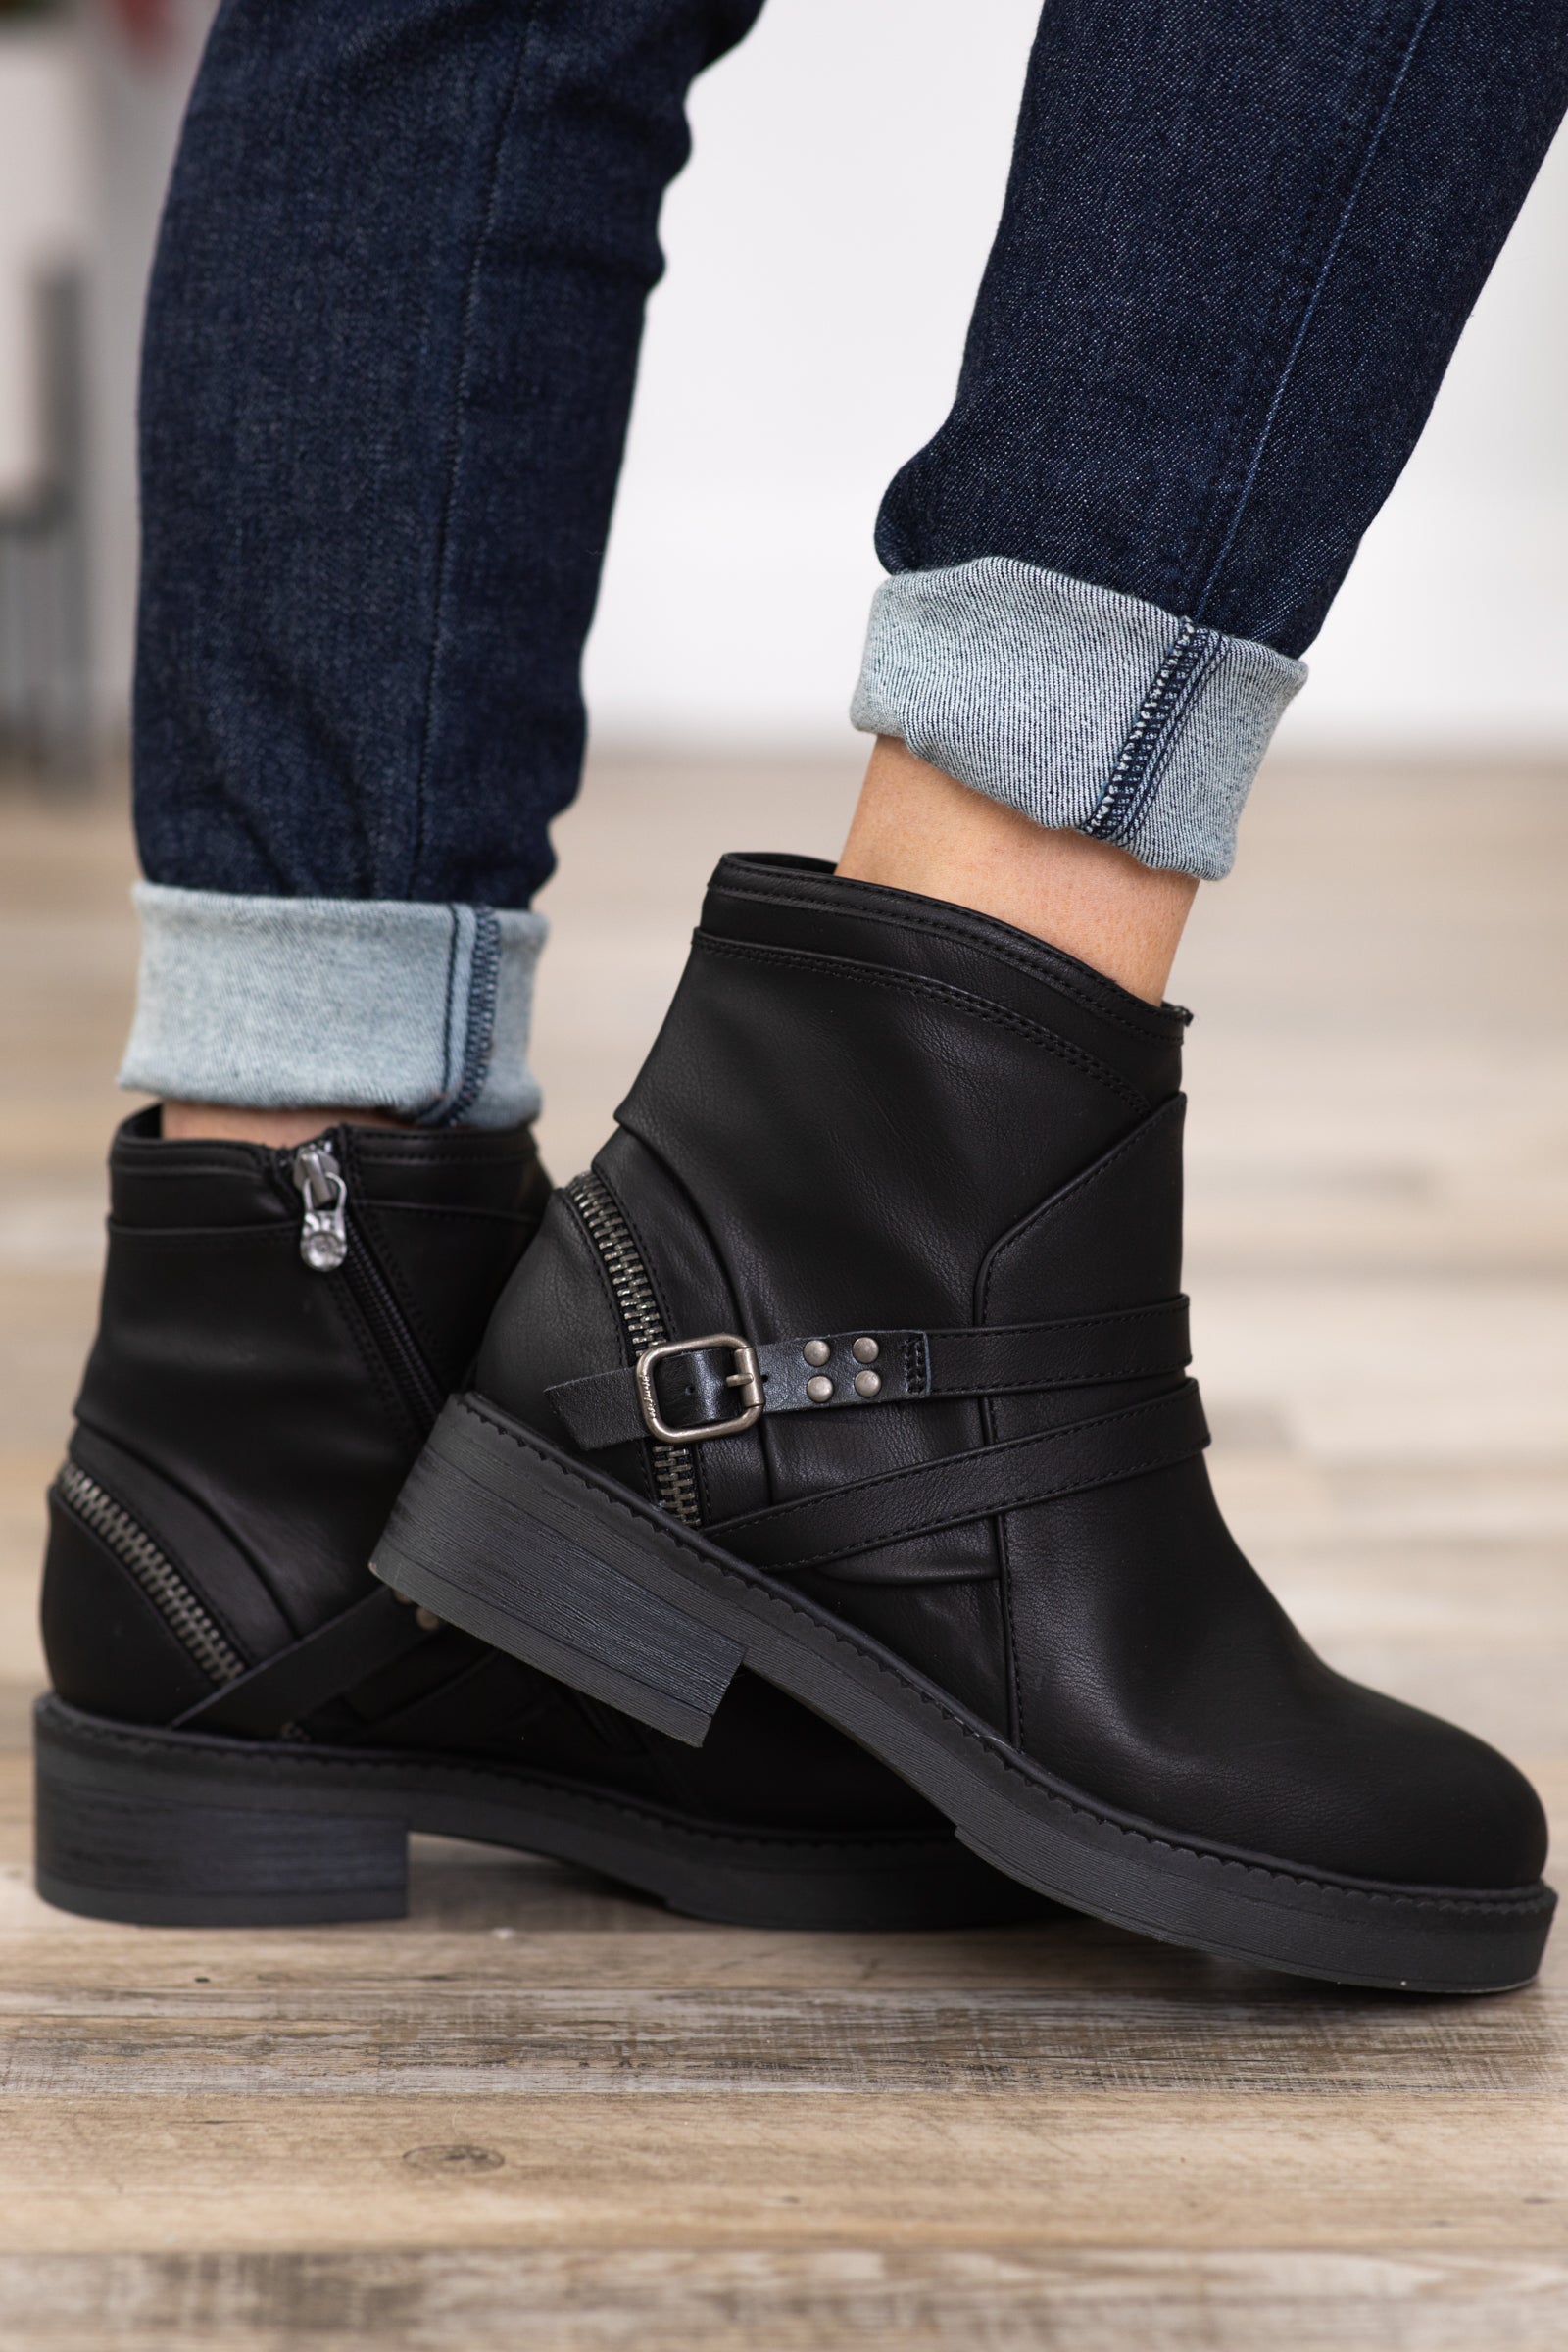 Black Vegan Leather Booties With Buckle Detail